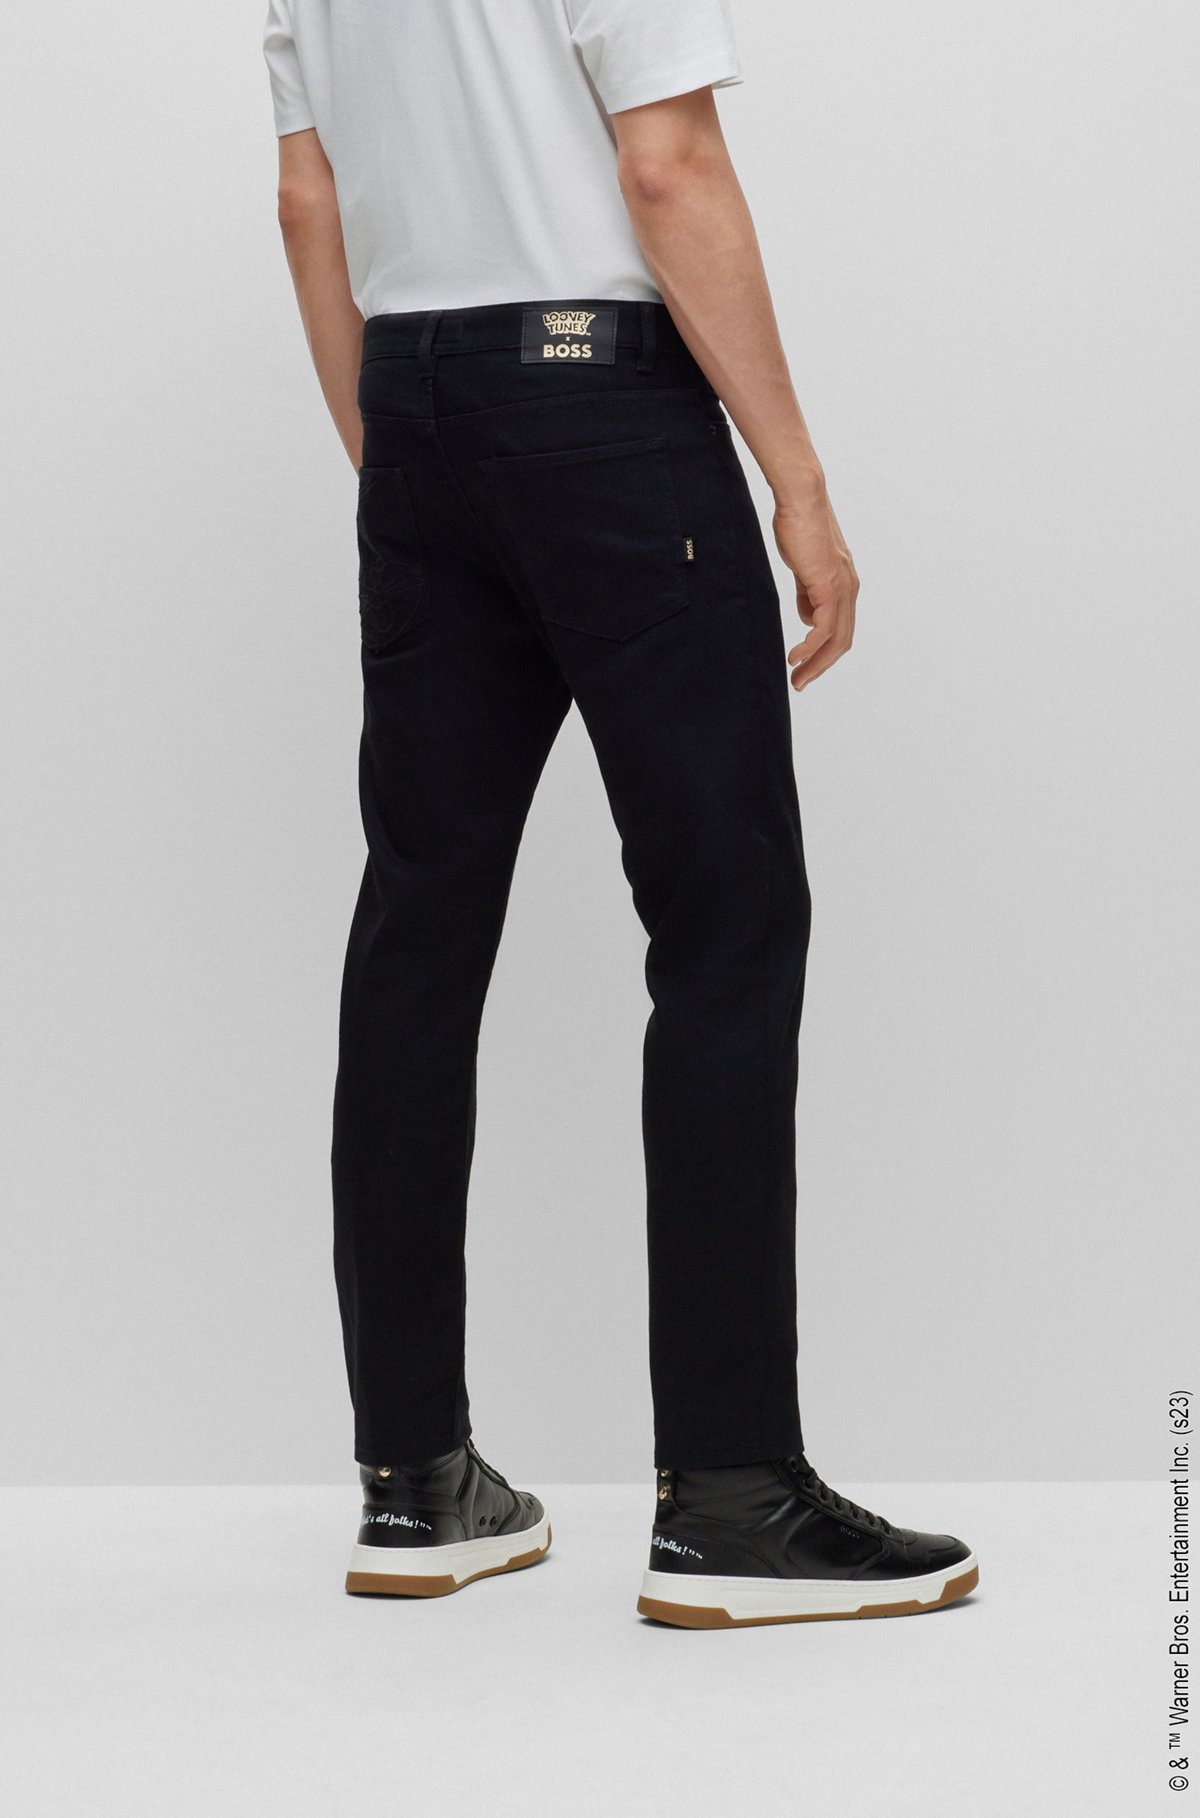 Looney Tunes x BOSS Black slim-fit jeans with cartoon embroidery, Black